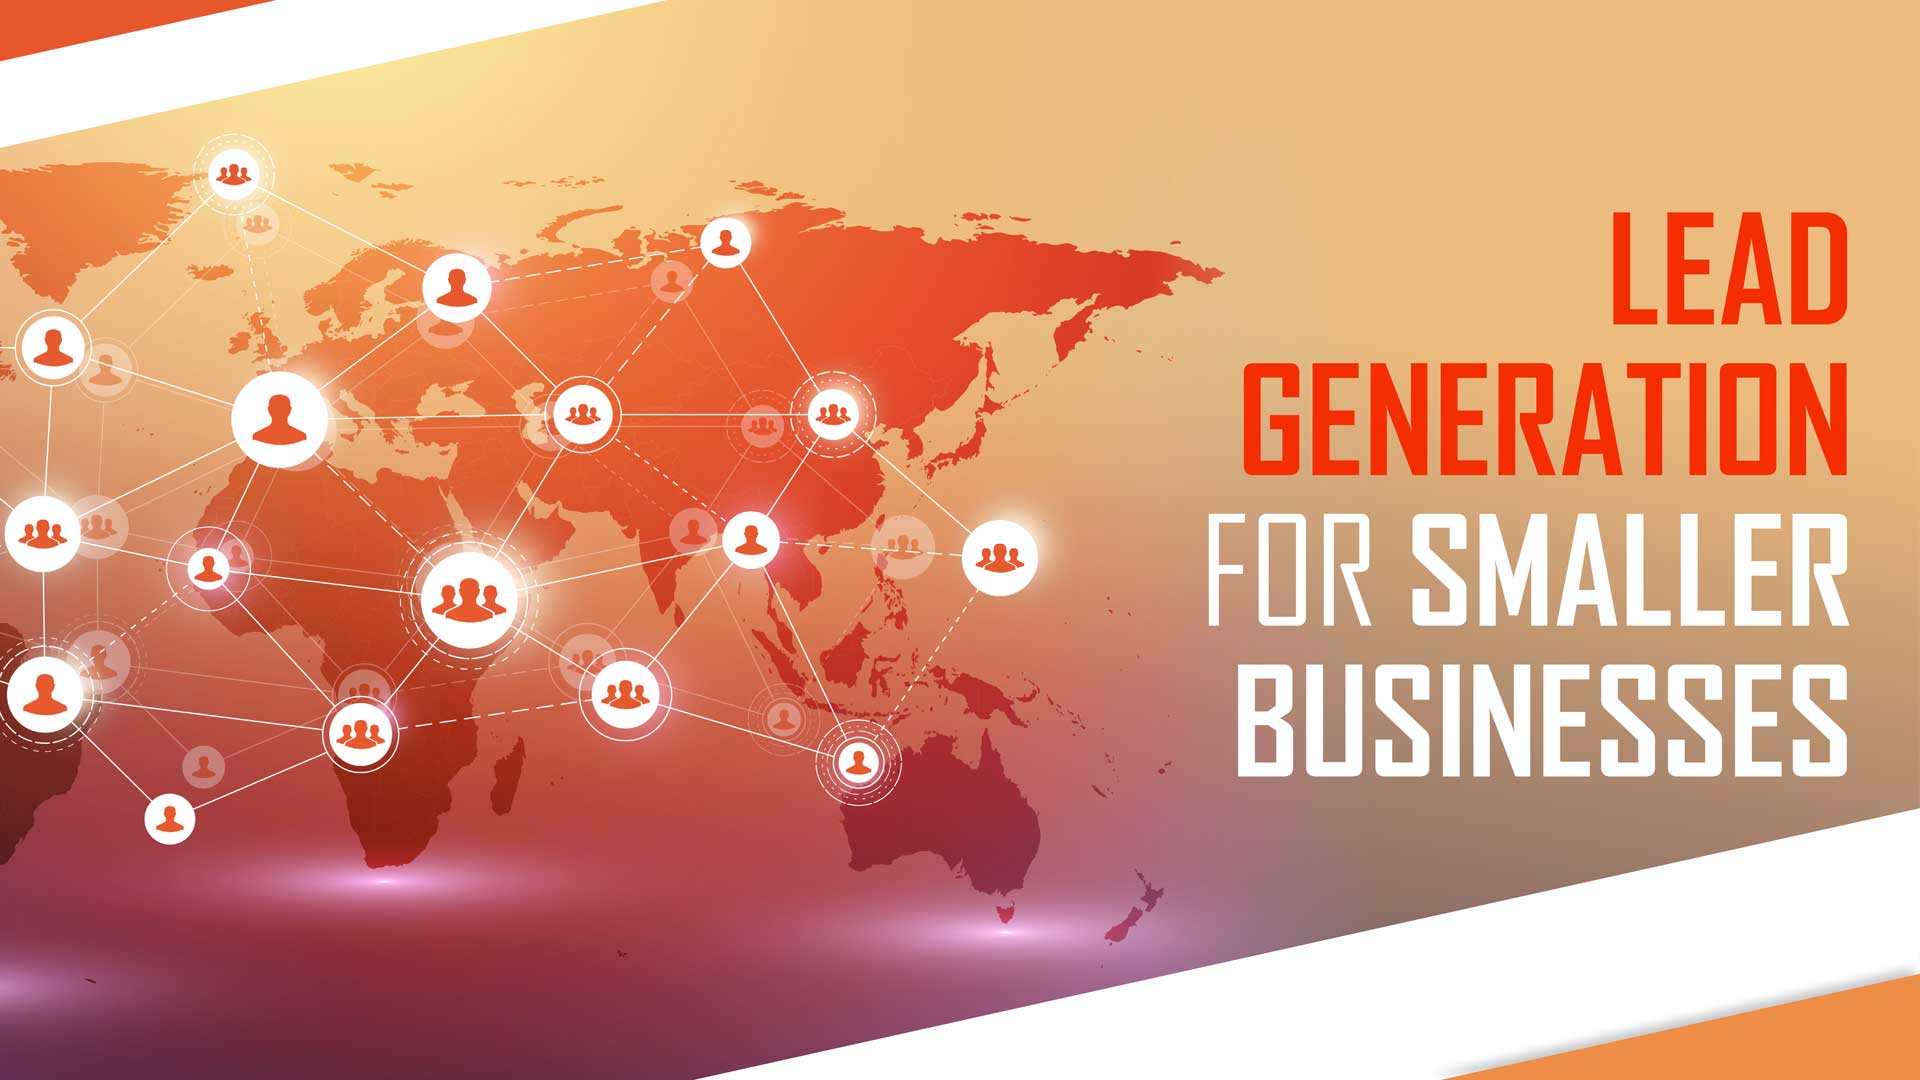 Lead Generation for Smaller Businesses